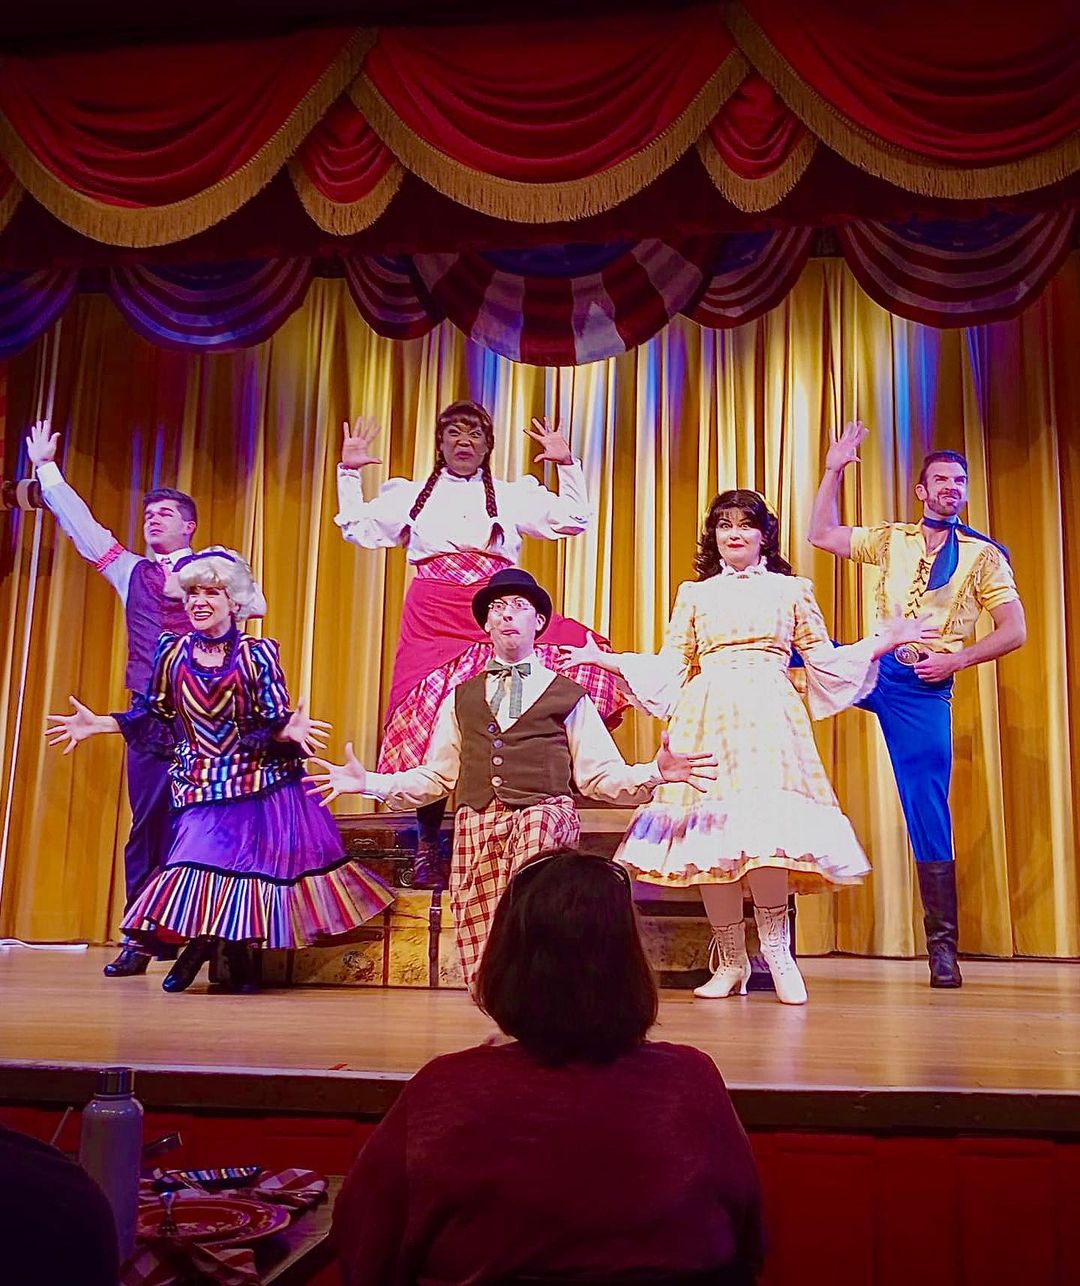 Hoop-Dee-Doo Musical Revue - Dining and Show at Disney (Fort Wilderness) (7)